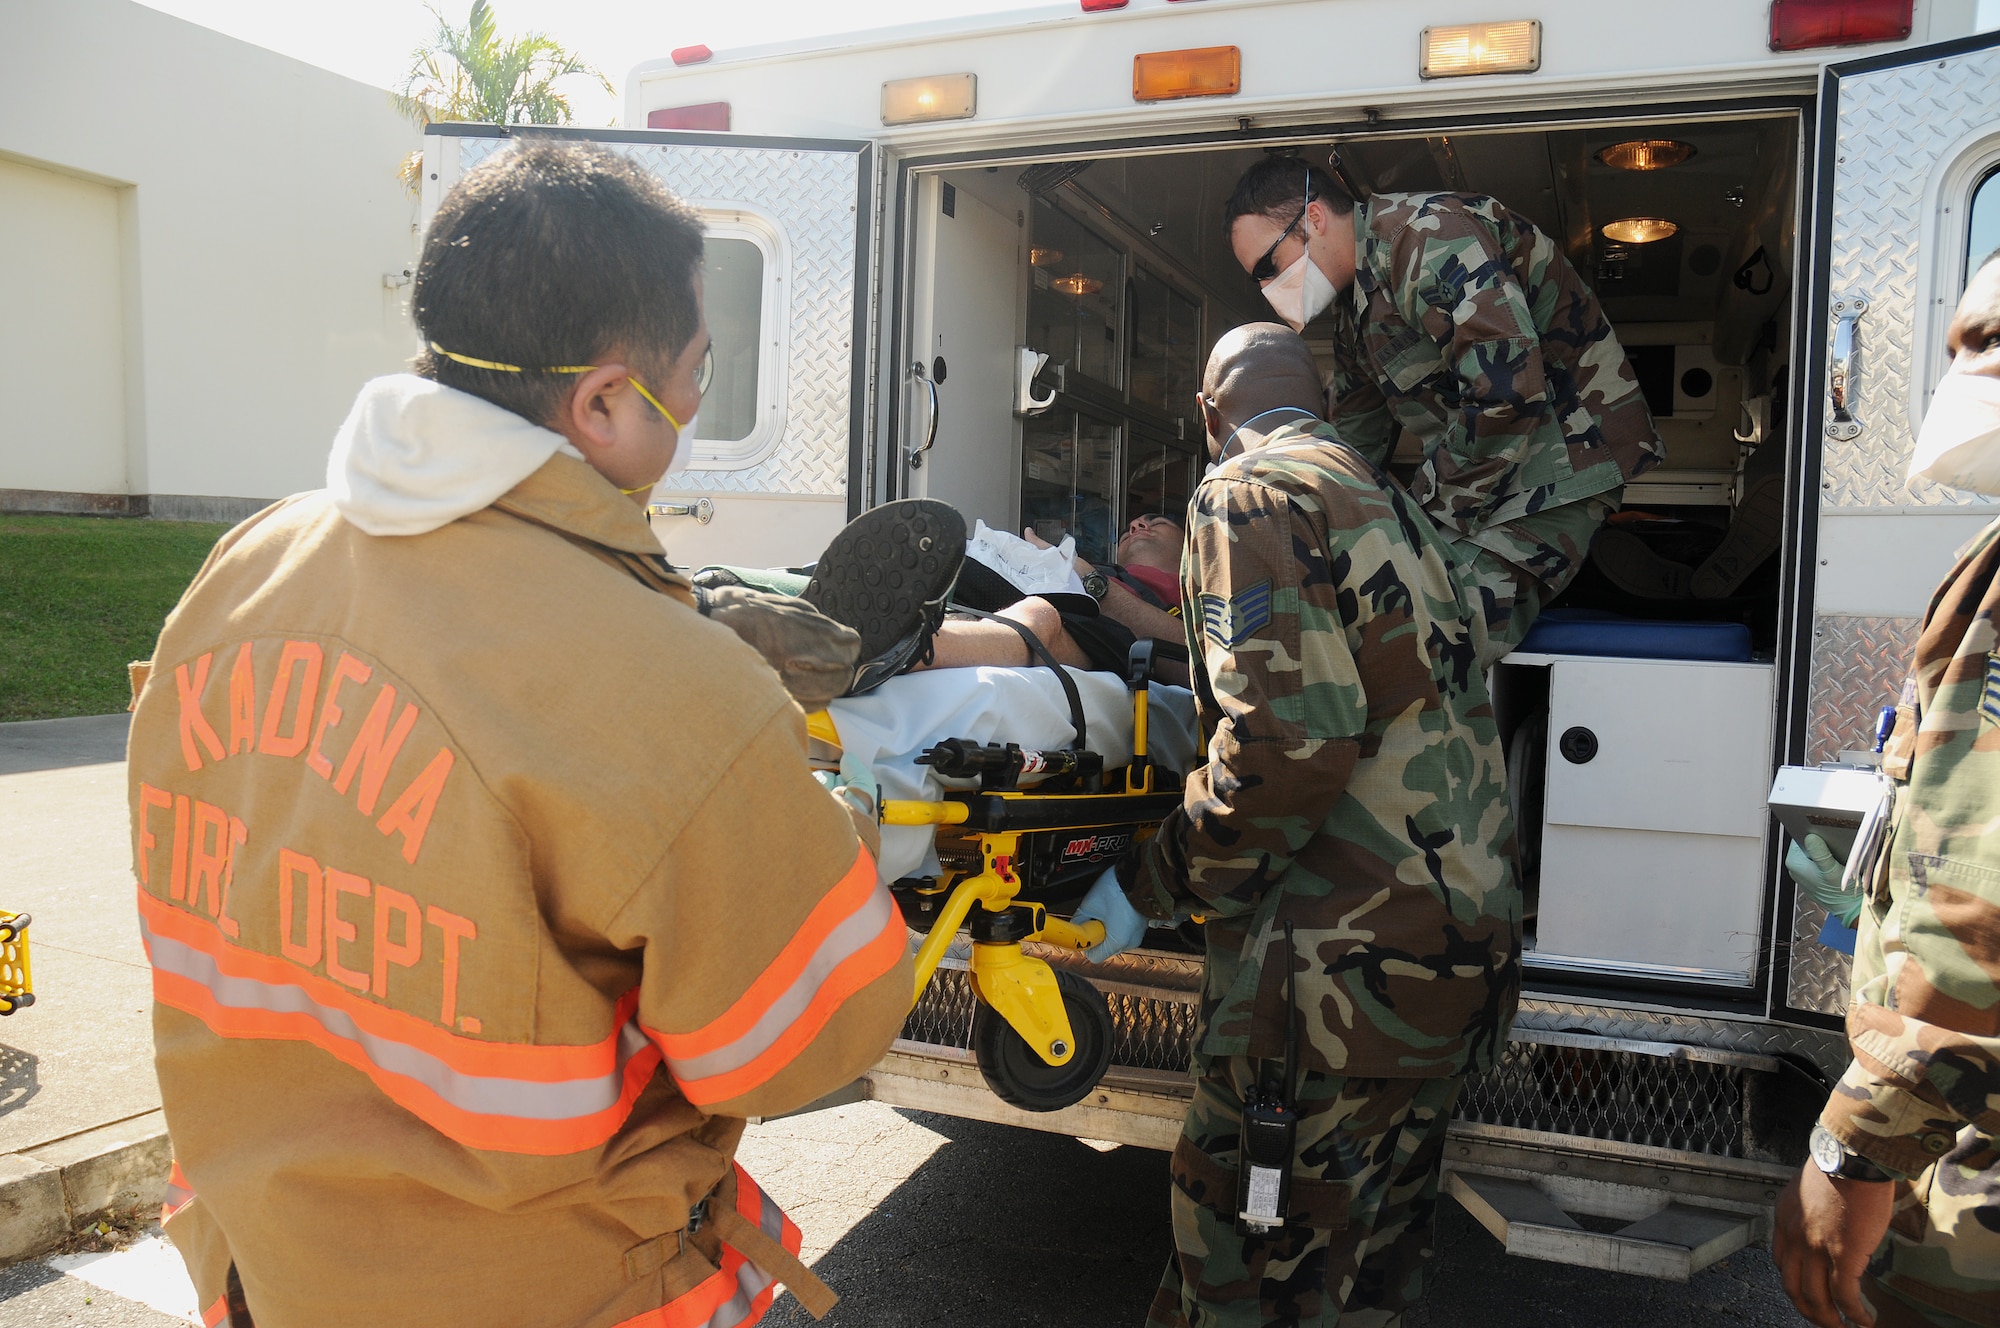 Kadena fire fighters and members of the 18th Medical Group load a Kadena High School student into an ambulance following a simulated contamination of the high school's food supply during a Local Operational Readiness Exercise at Kadena Air Base, Japan  Dec. 02, 2008. The simulation is part of a Local Operational Readiness Exercise meant to test the operational readiness of Kadena Airmen. 
(U.S. Air Force photo/Airman 1st Class Chad Warren)